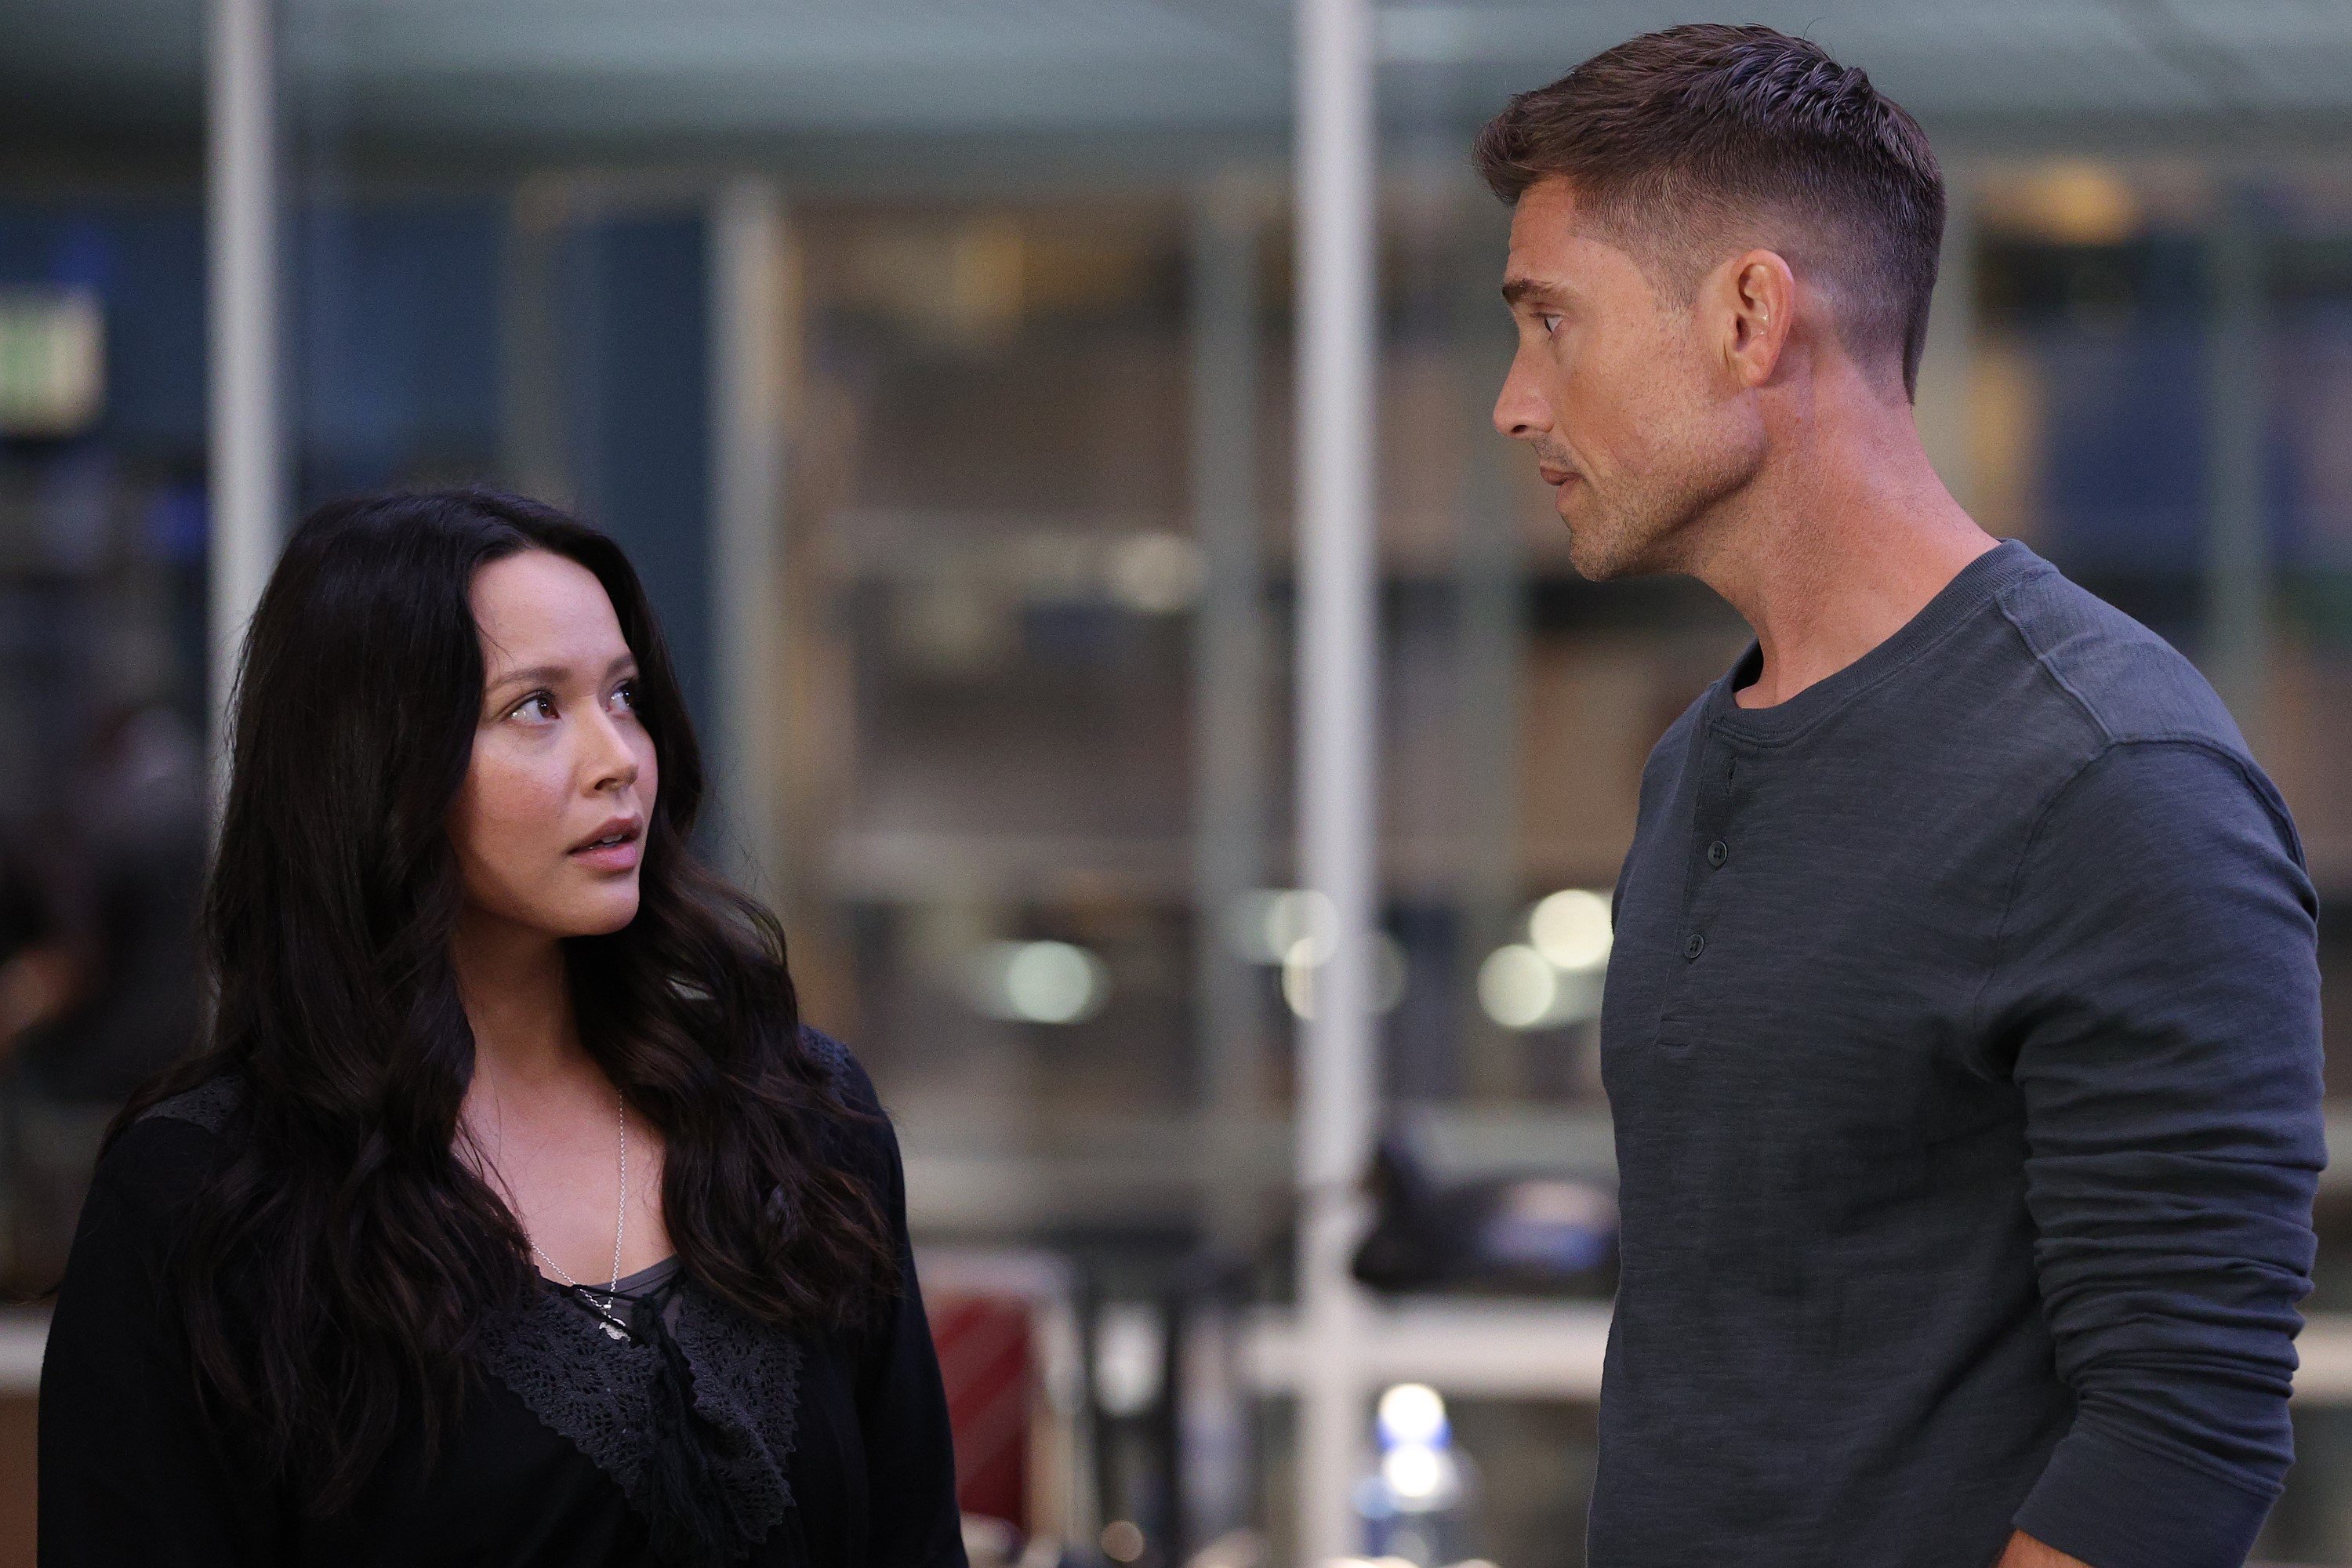 Melissa O'Neil and Eric Winter star as Lucy Chen and Tim Bradford in 'The Rookie' Season 5 on ABC. In the photo, they share a scene in season 4 where Lucy wears a black long-sleeved top and Tim wears a dark gray henley shirt.